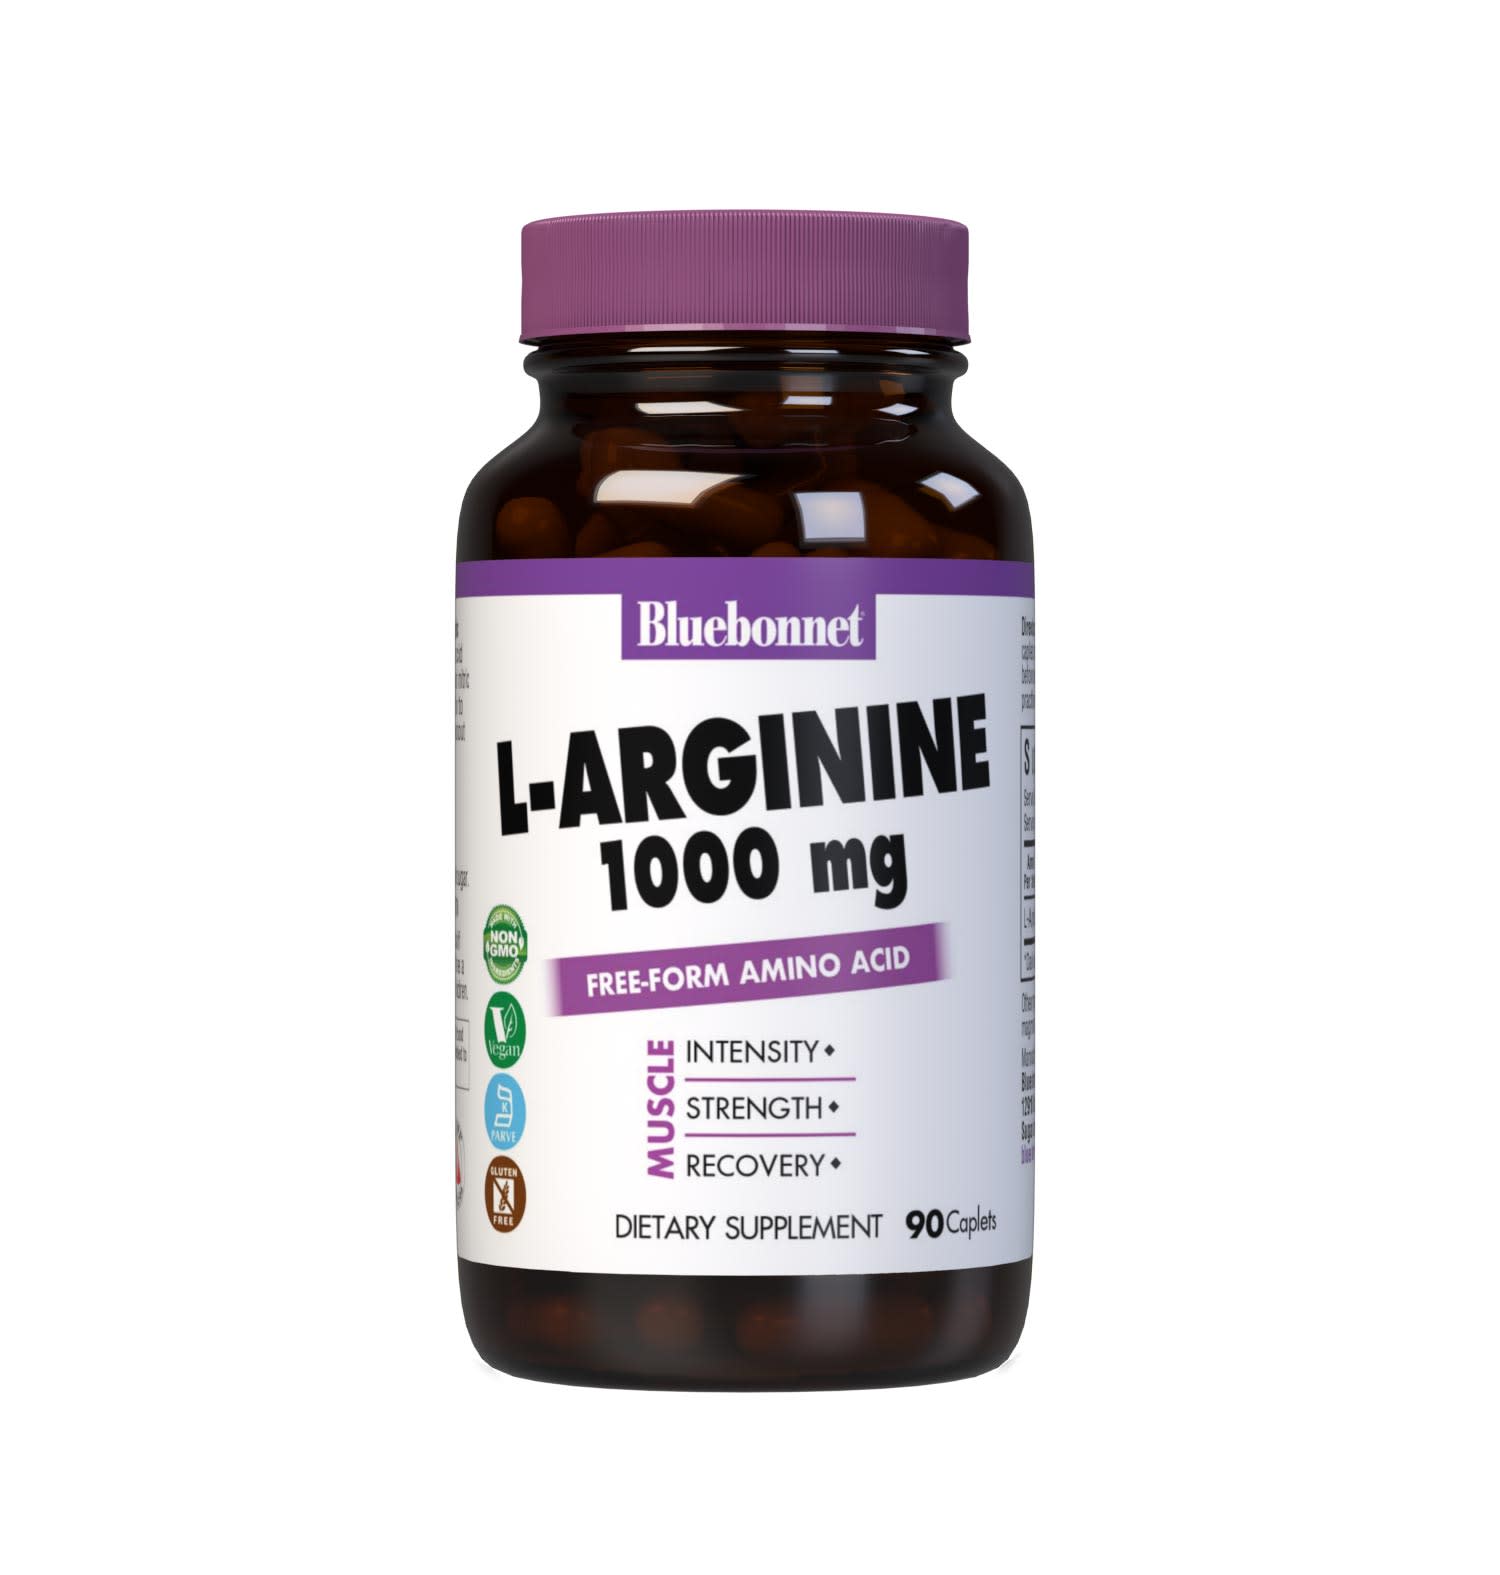 Bluebonnet’s L-Arginine 1000 mg Caplets provide free-form, pharmaceutical-grade L-arginine from Ajinomoto, the world-class leader in the production and purity of amino acids. Since this vegetarian-sourced amino acid is compressed into easy-to-swallow caplets for maximum assimilation and absorption, L-arginine is more bioavailable to increase nitric oxide levels. This supports enhanced blood flow to muscles for a more intense, powerful workout and faster recovery. #size_90 count